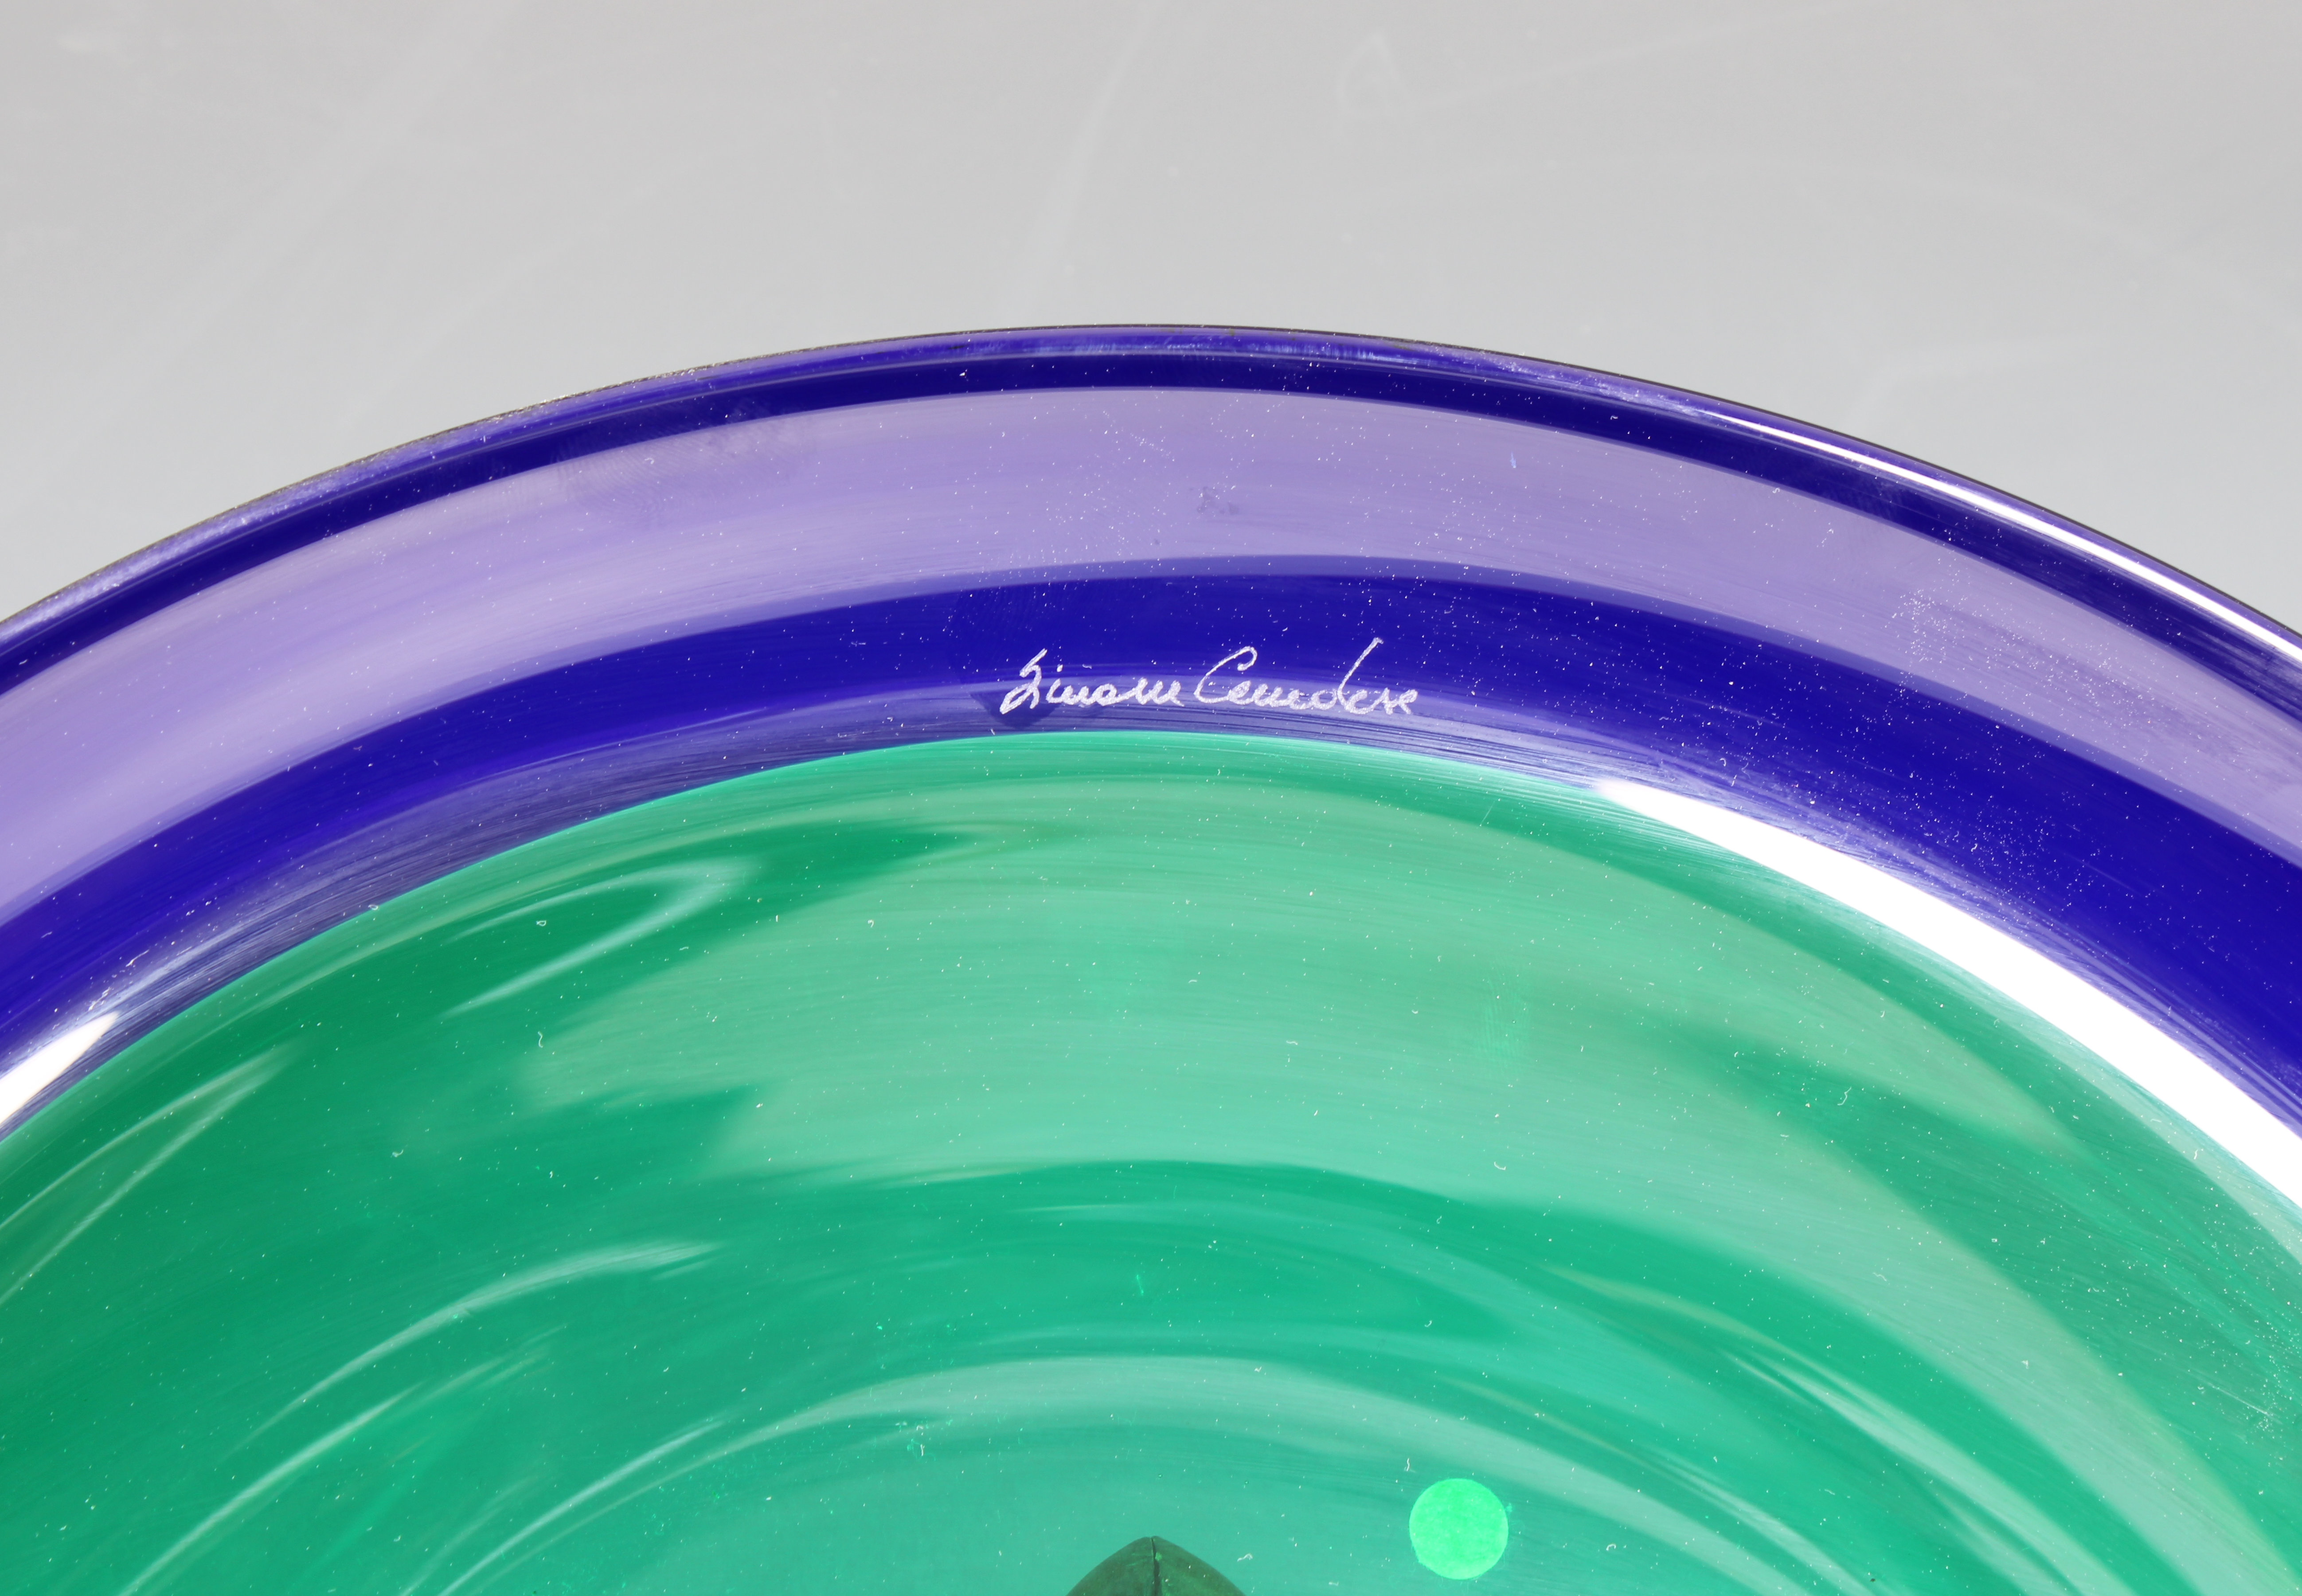 A blue and green Murano glass vase and plate by Simone Cenedese for Vivarini - Image 2 of 2